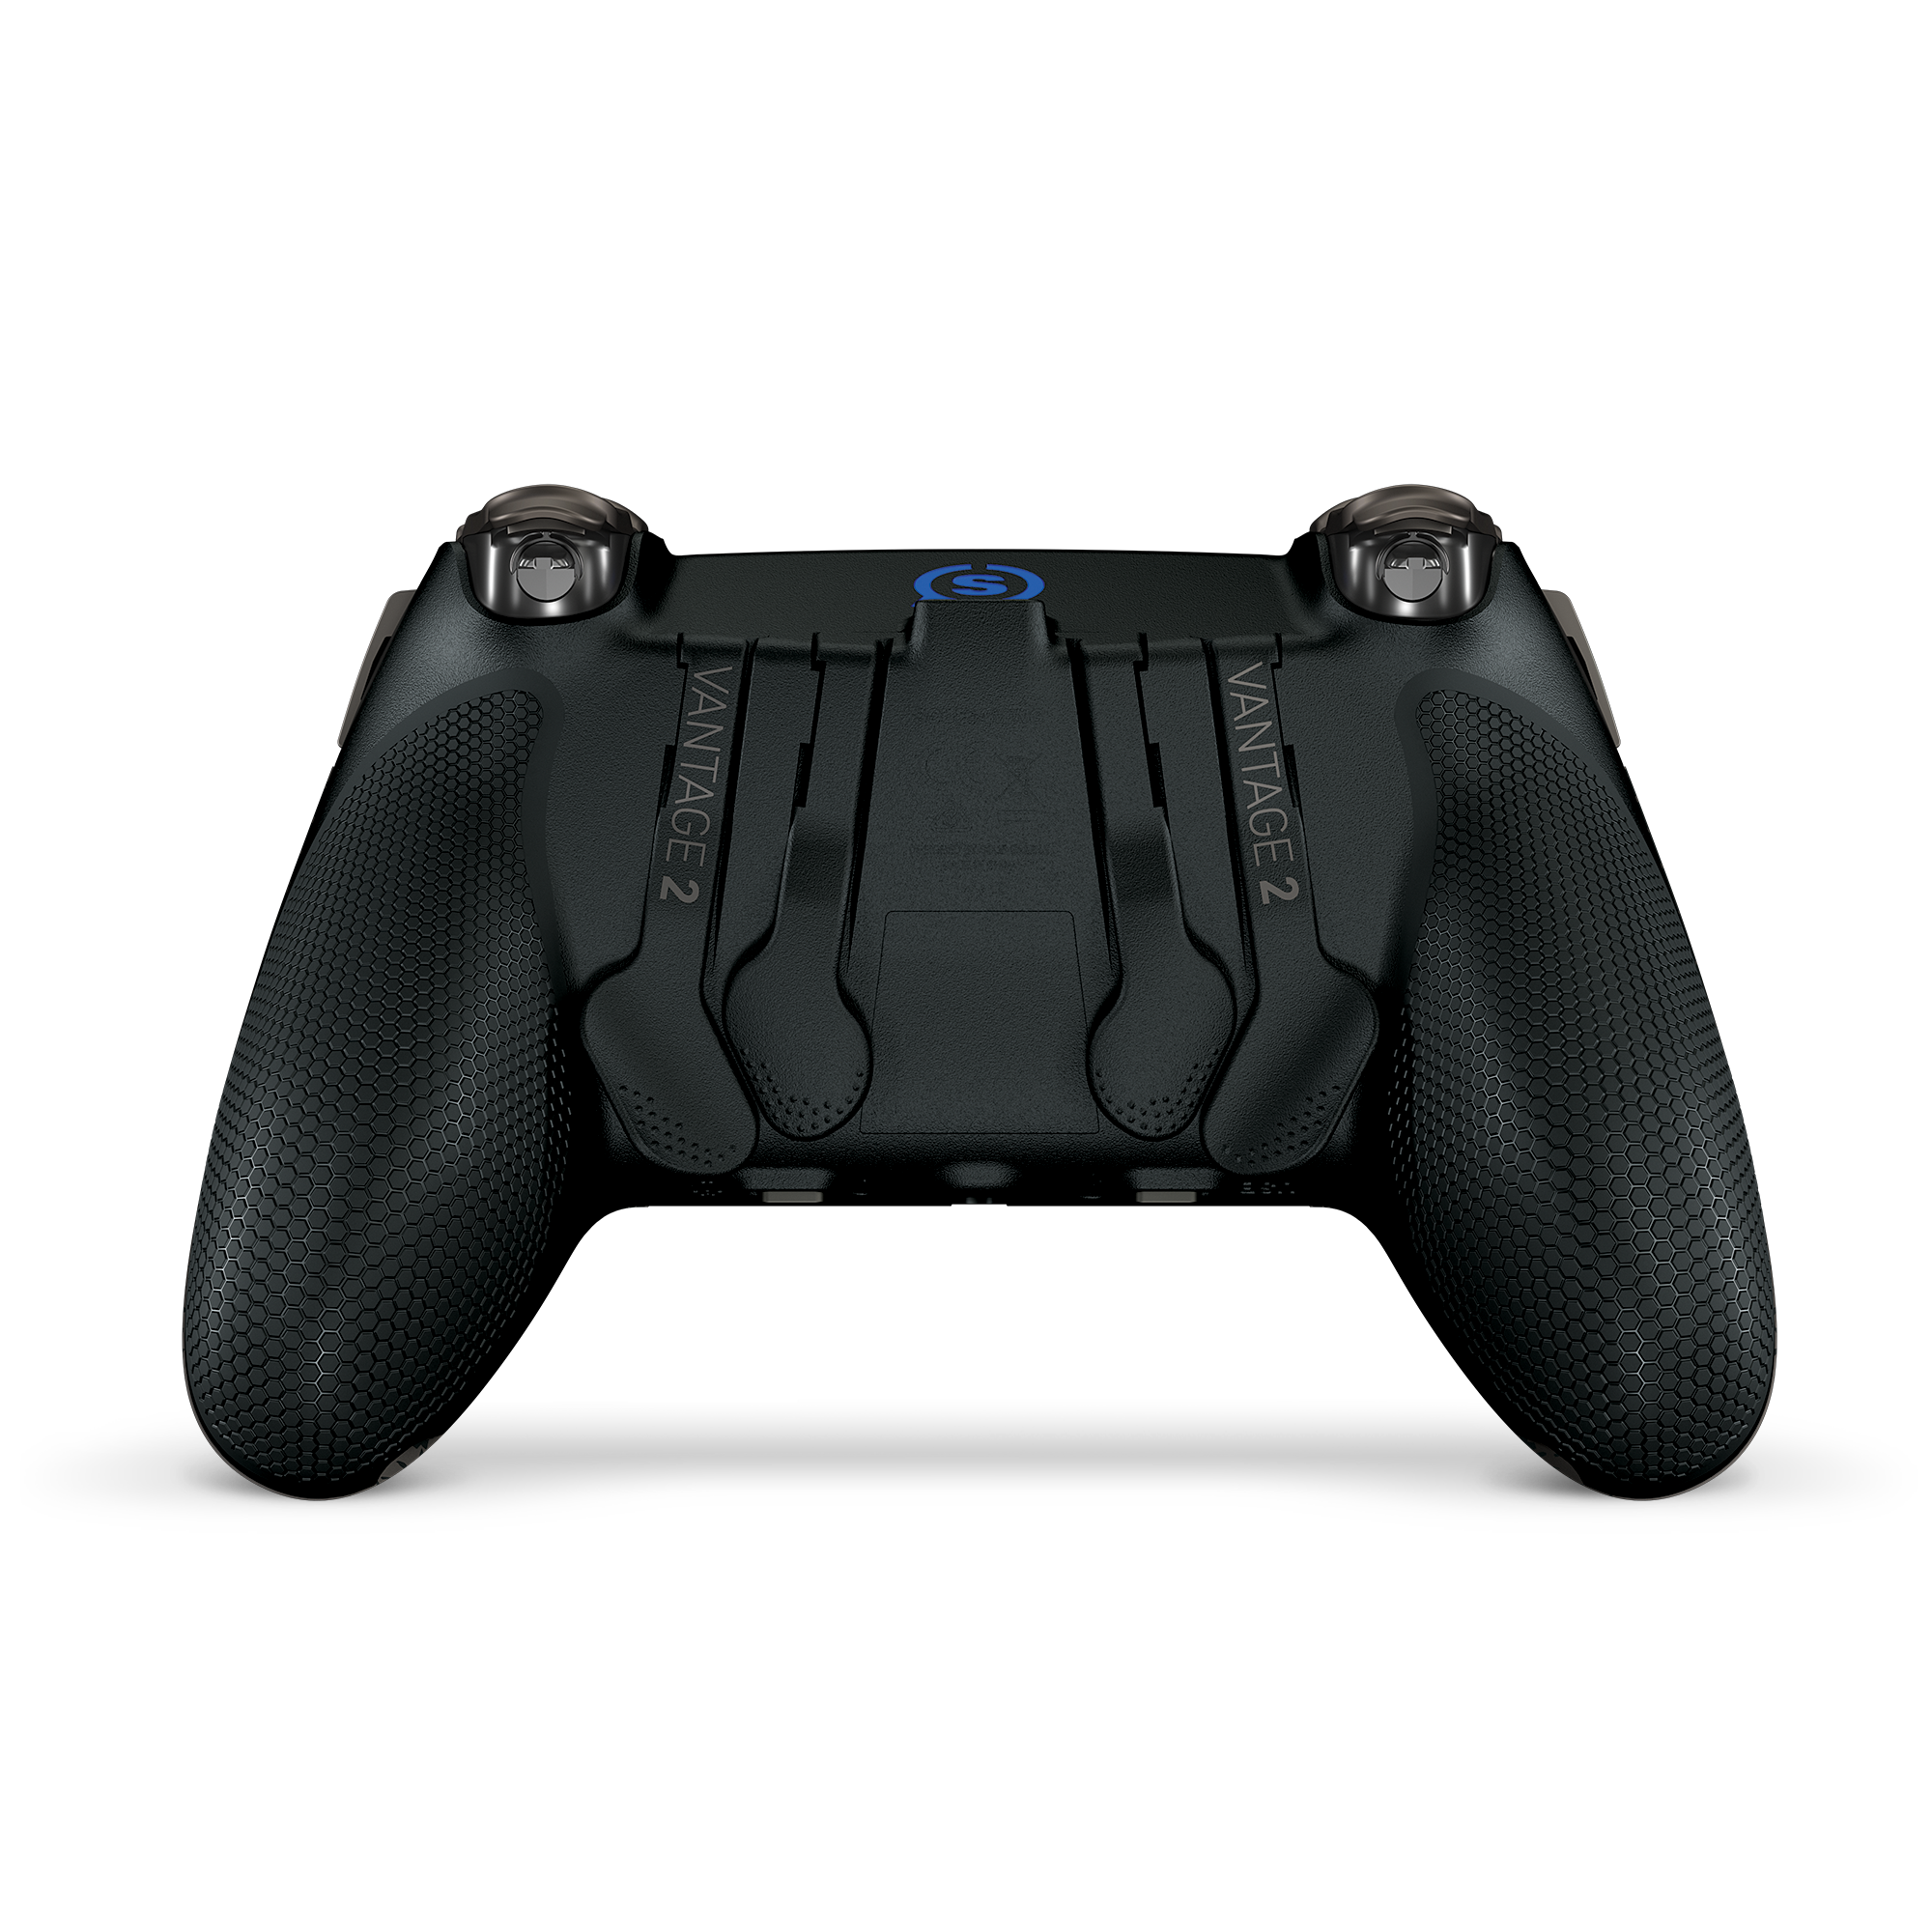 scuf controller ps4 in store